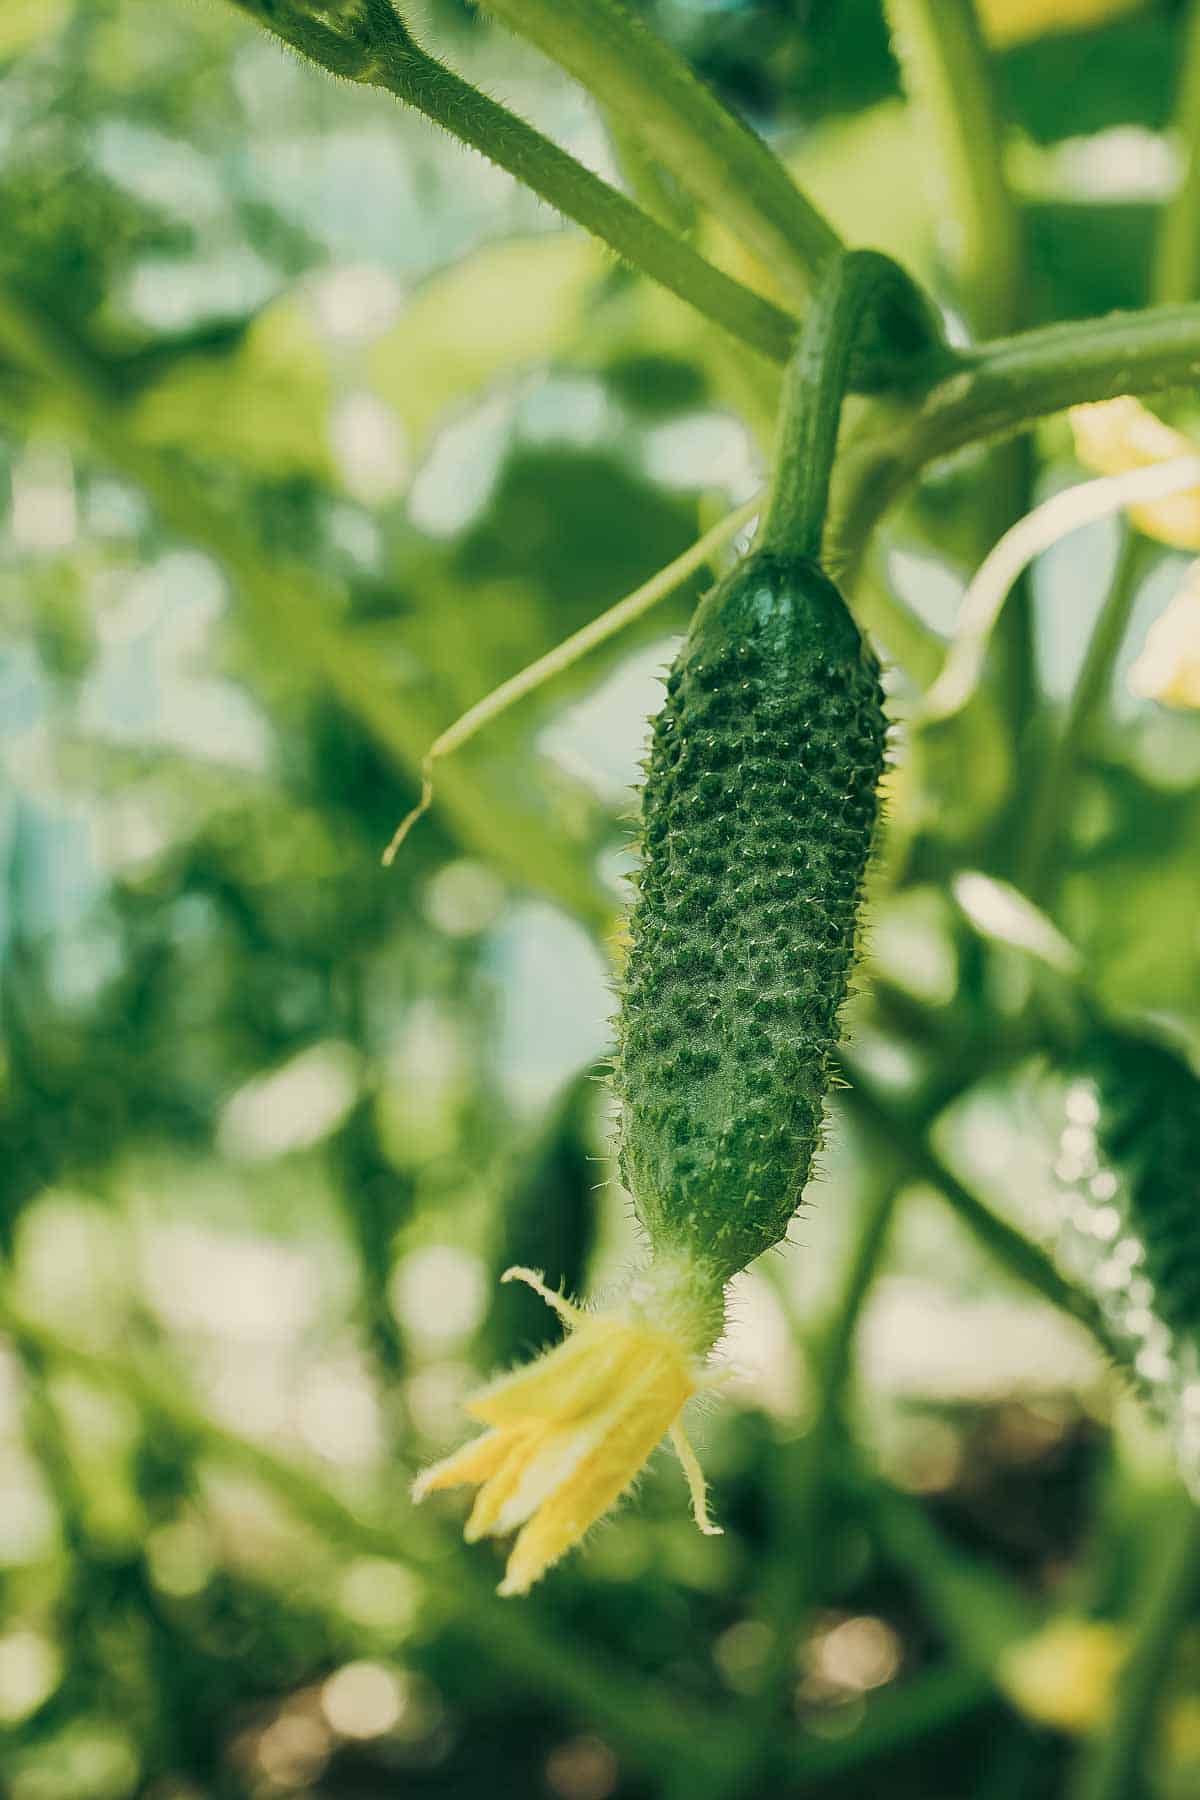 A young cucumber plan growing on a trellis. The flower is still attached to the end.